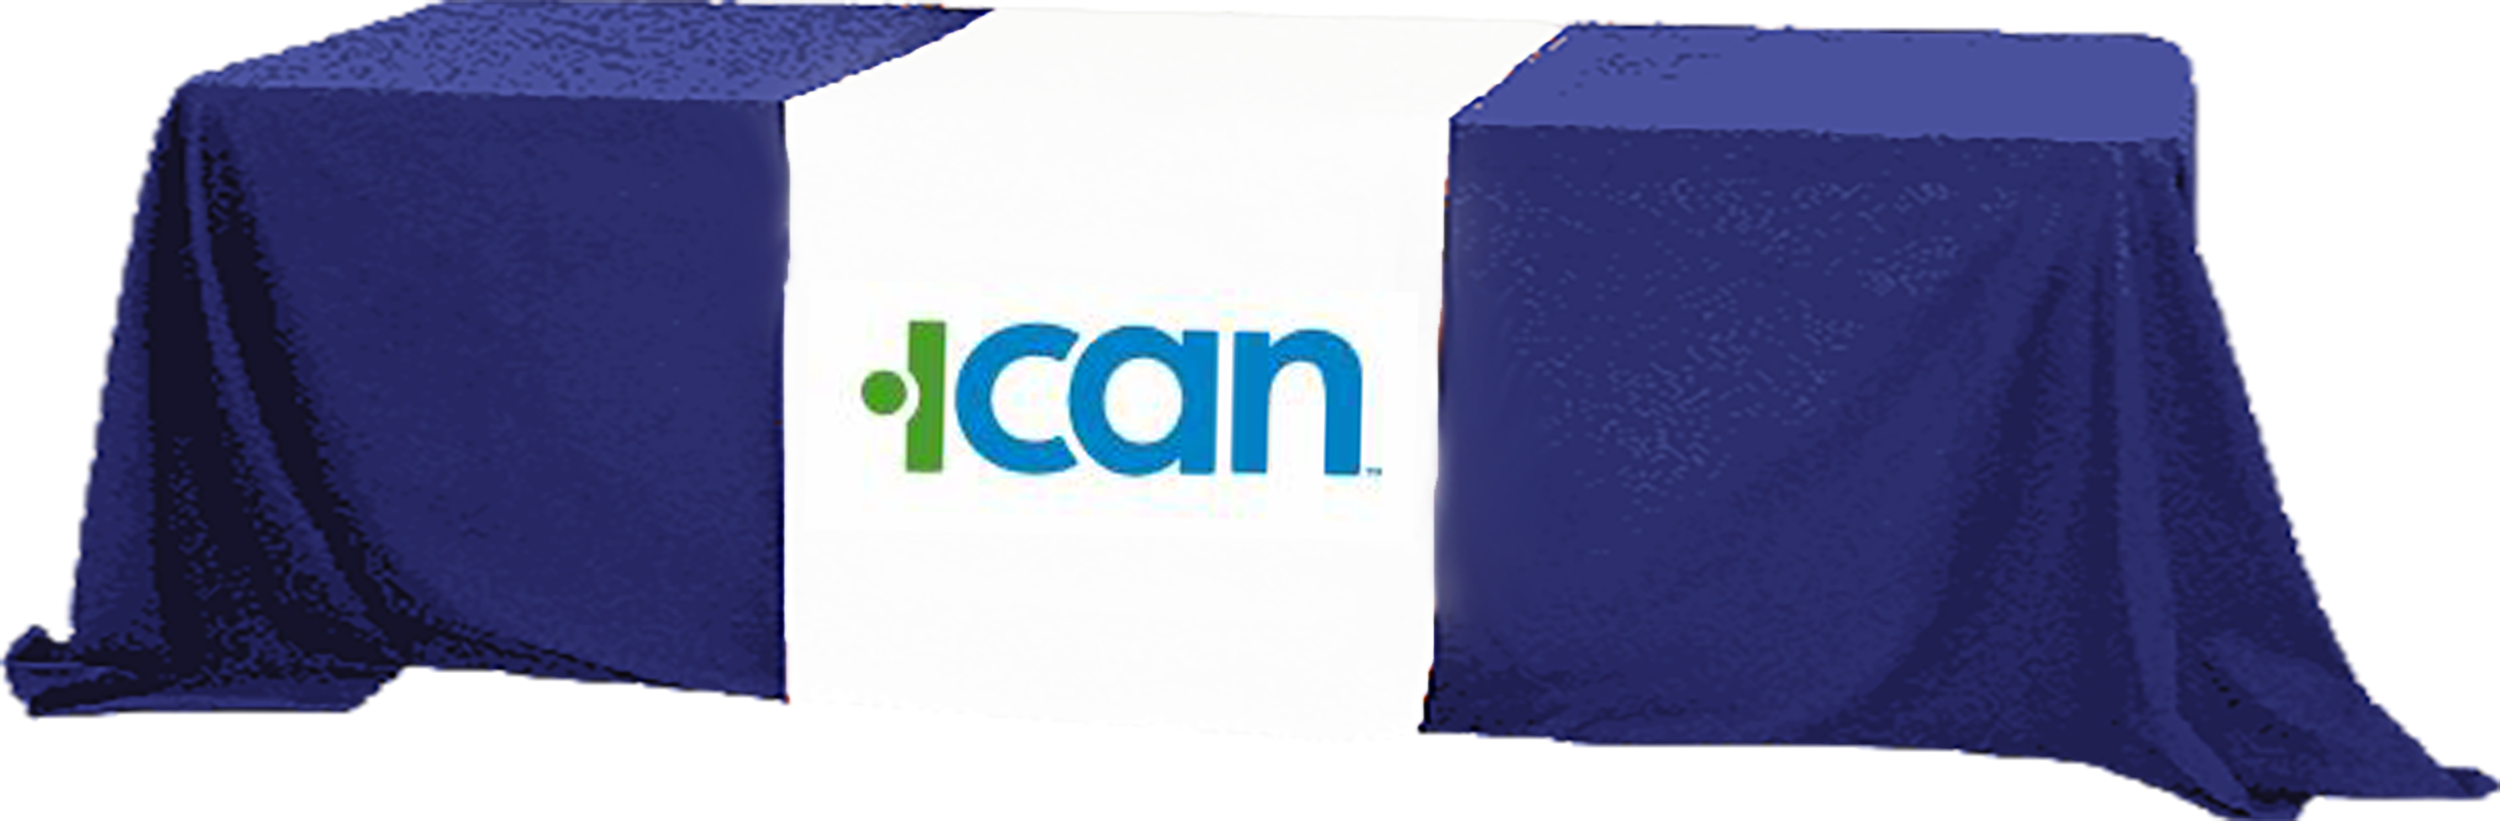 ICAN  logo on a table cover over a table image